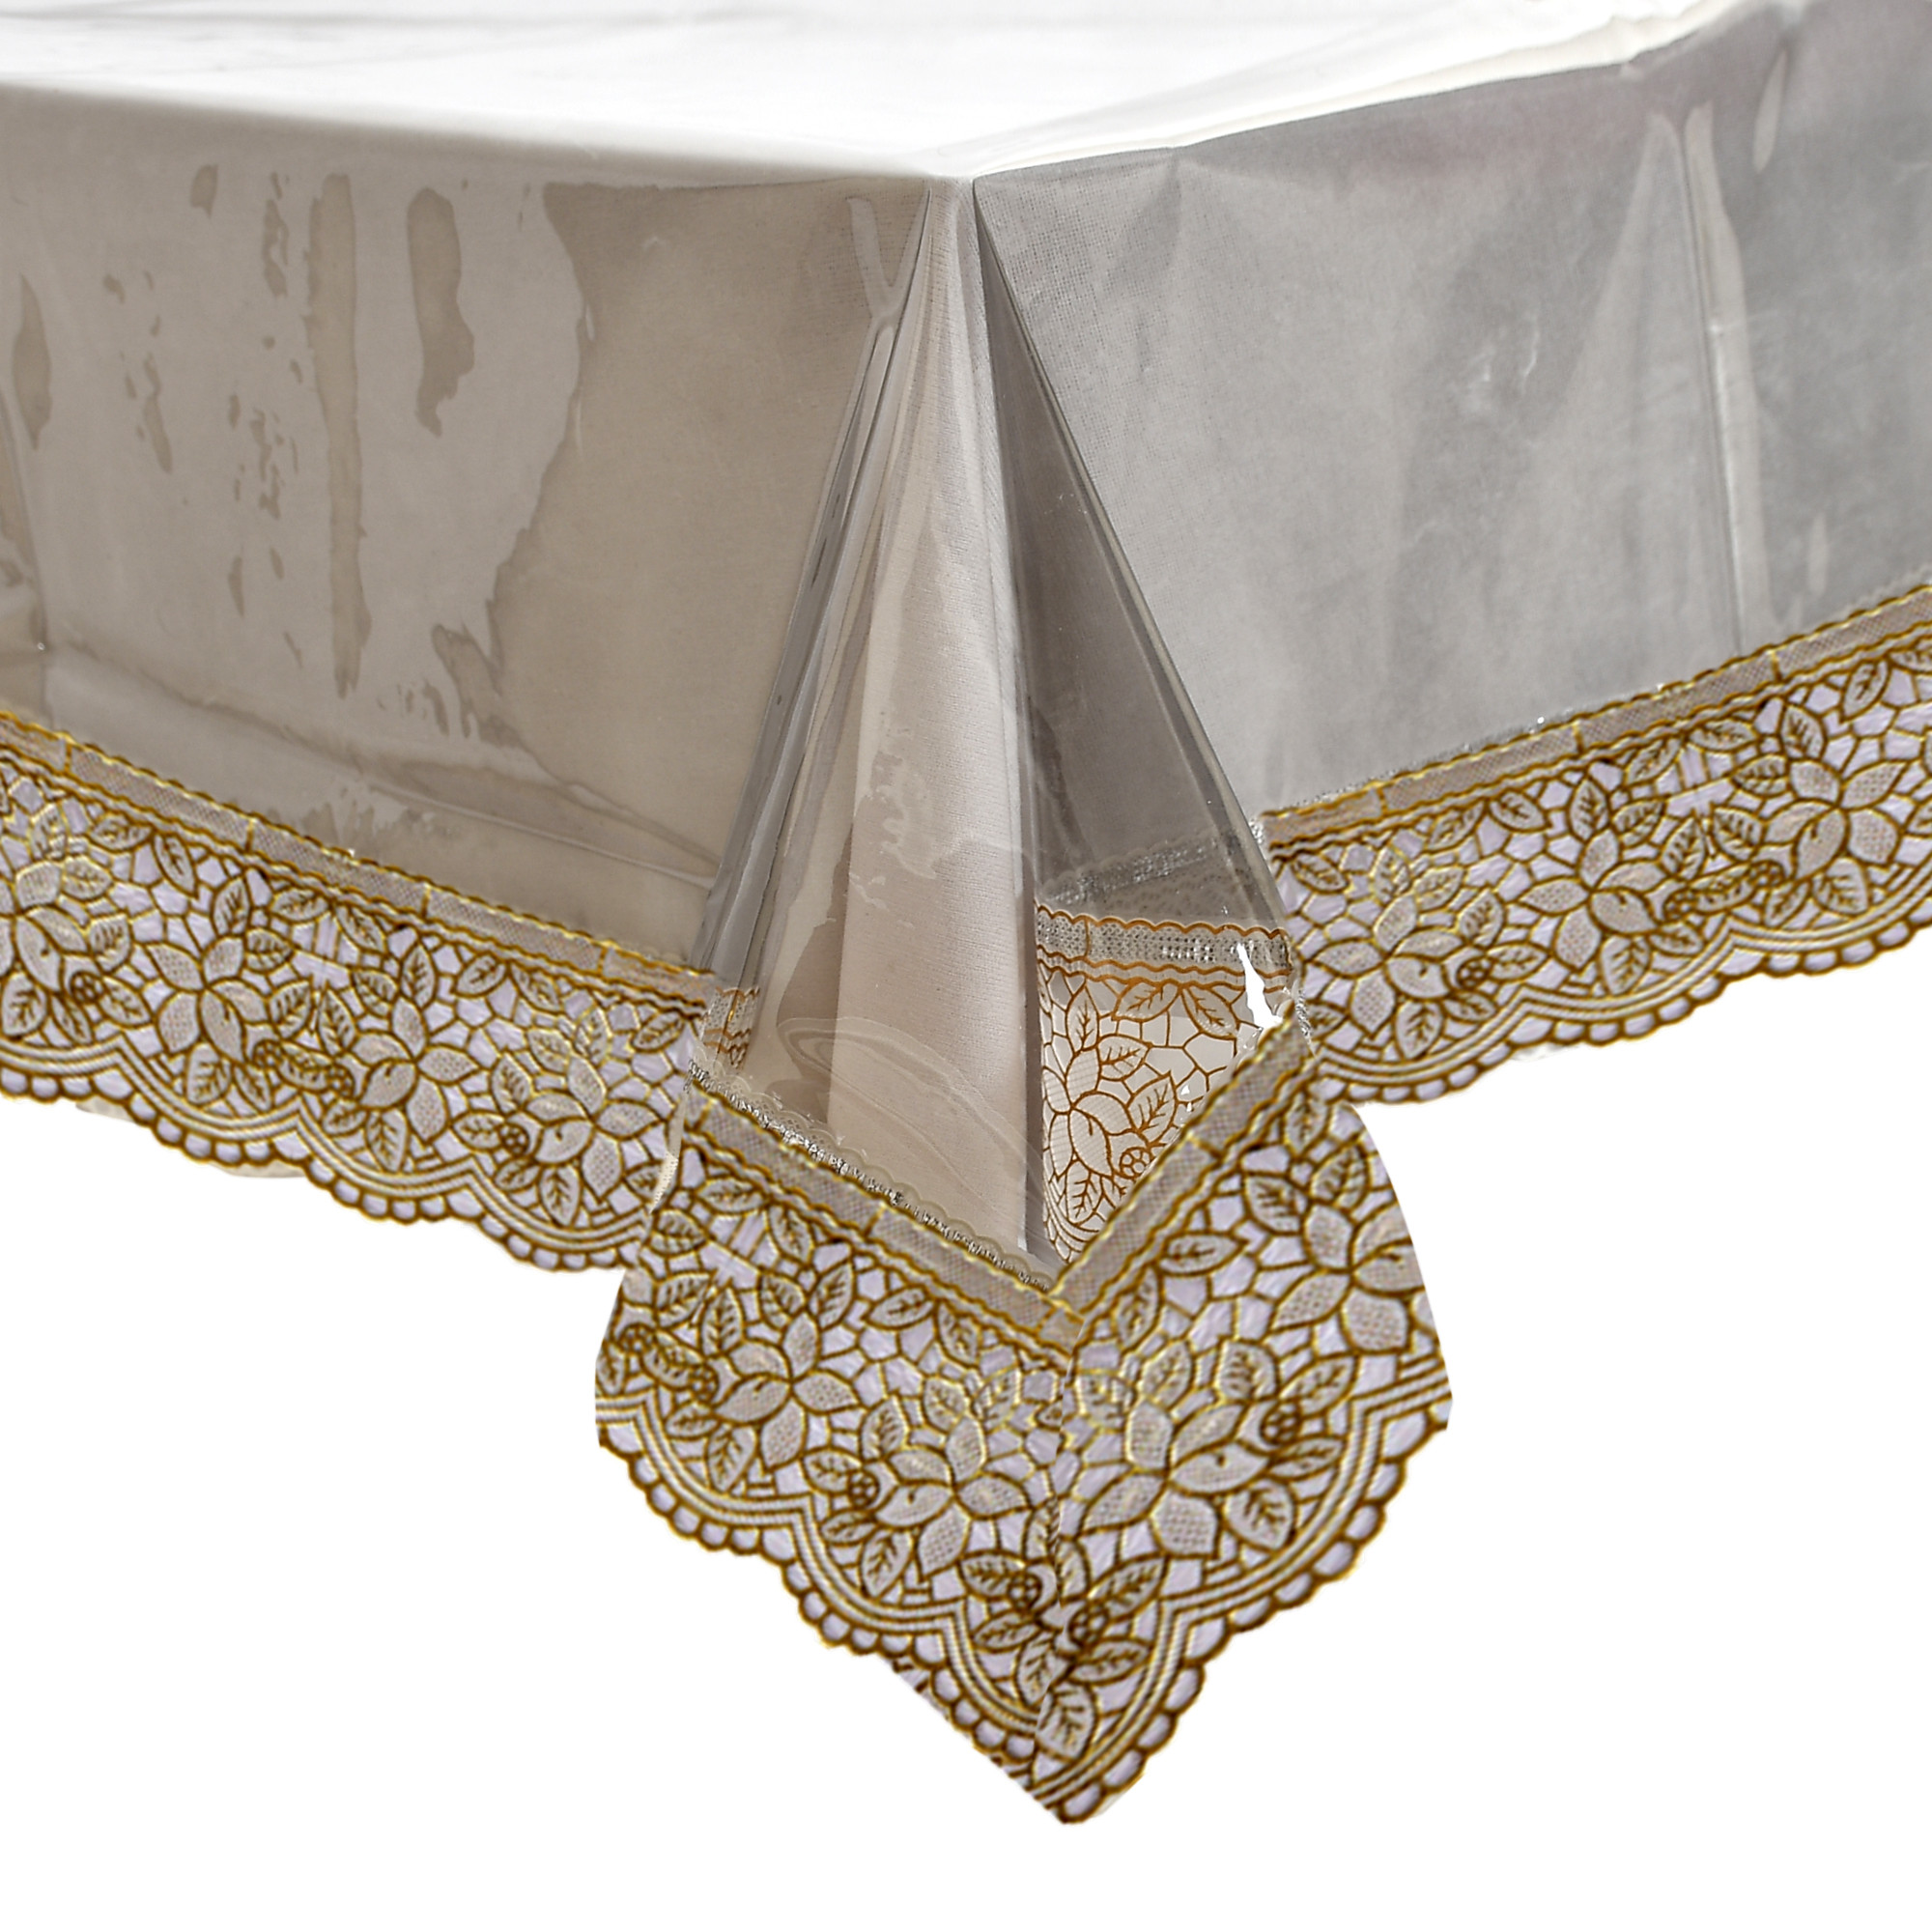 Kuber Industries PVC 6 Seater Center Table Cover With Gold Lace Border 60